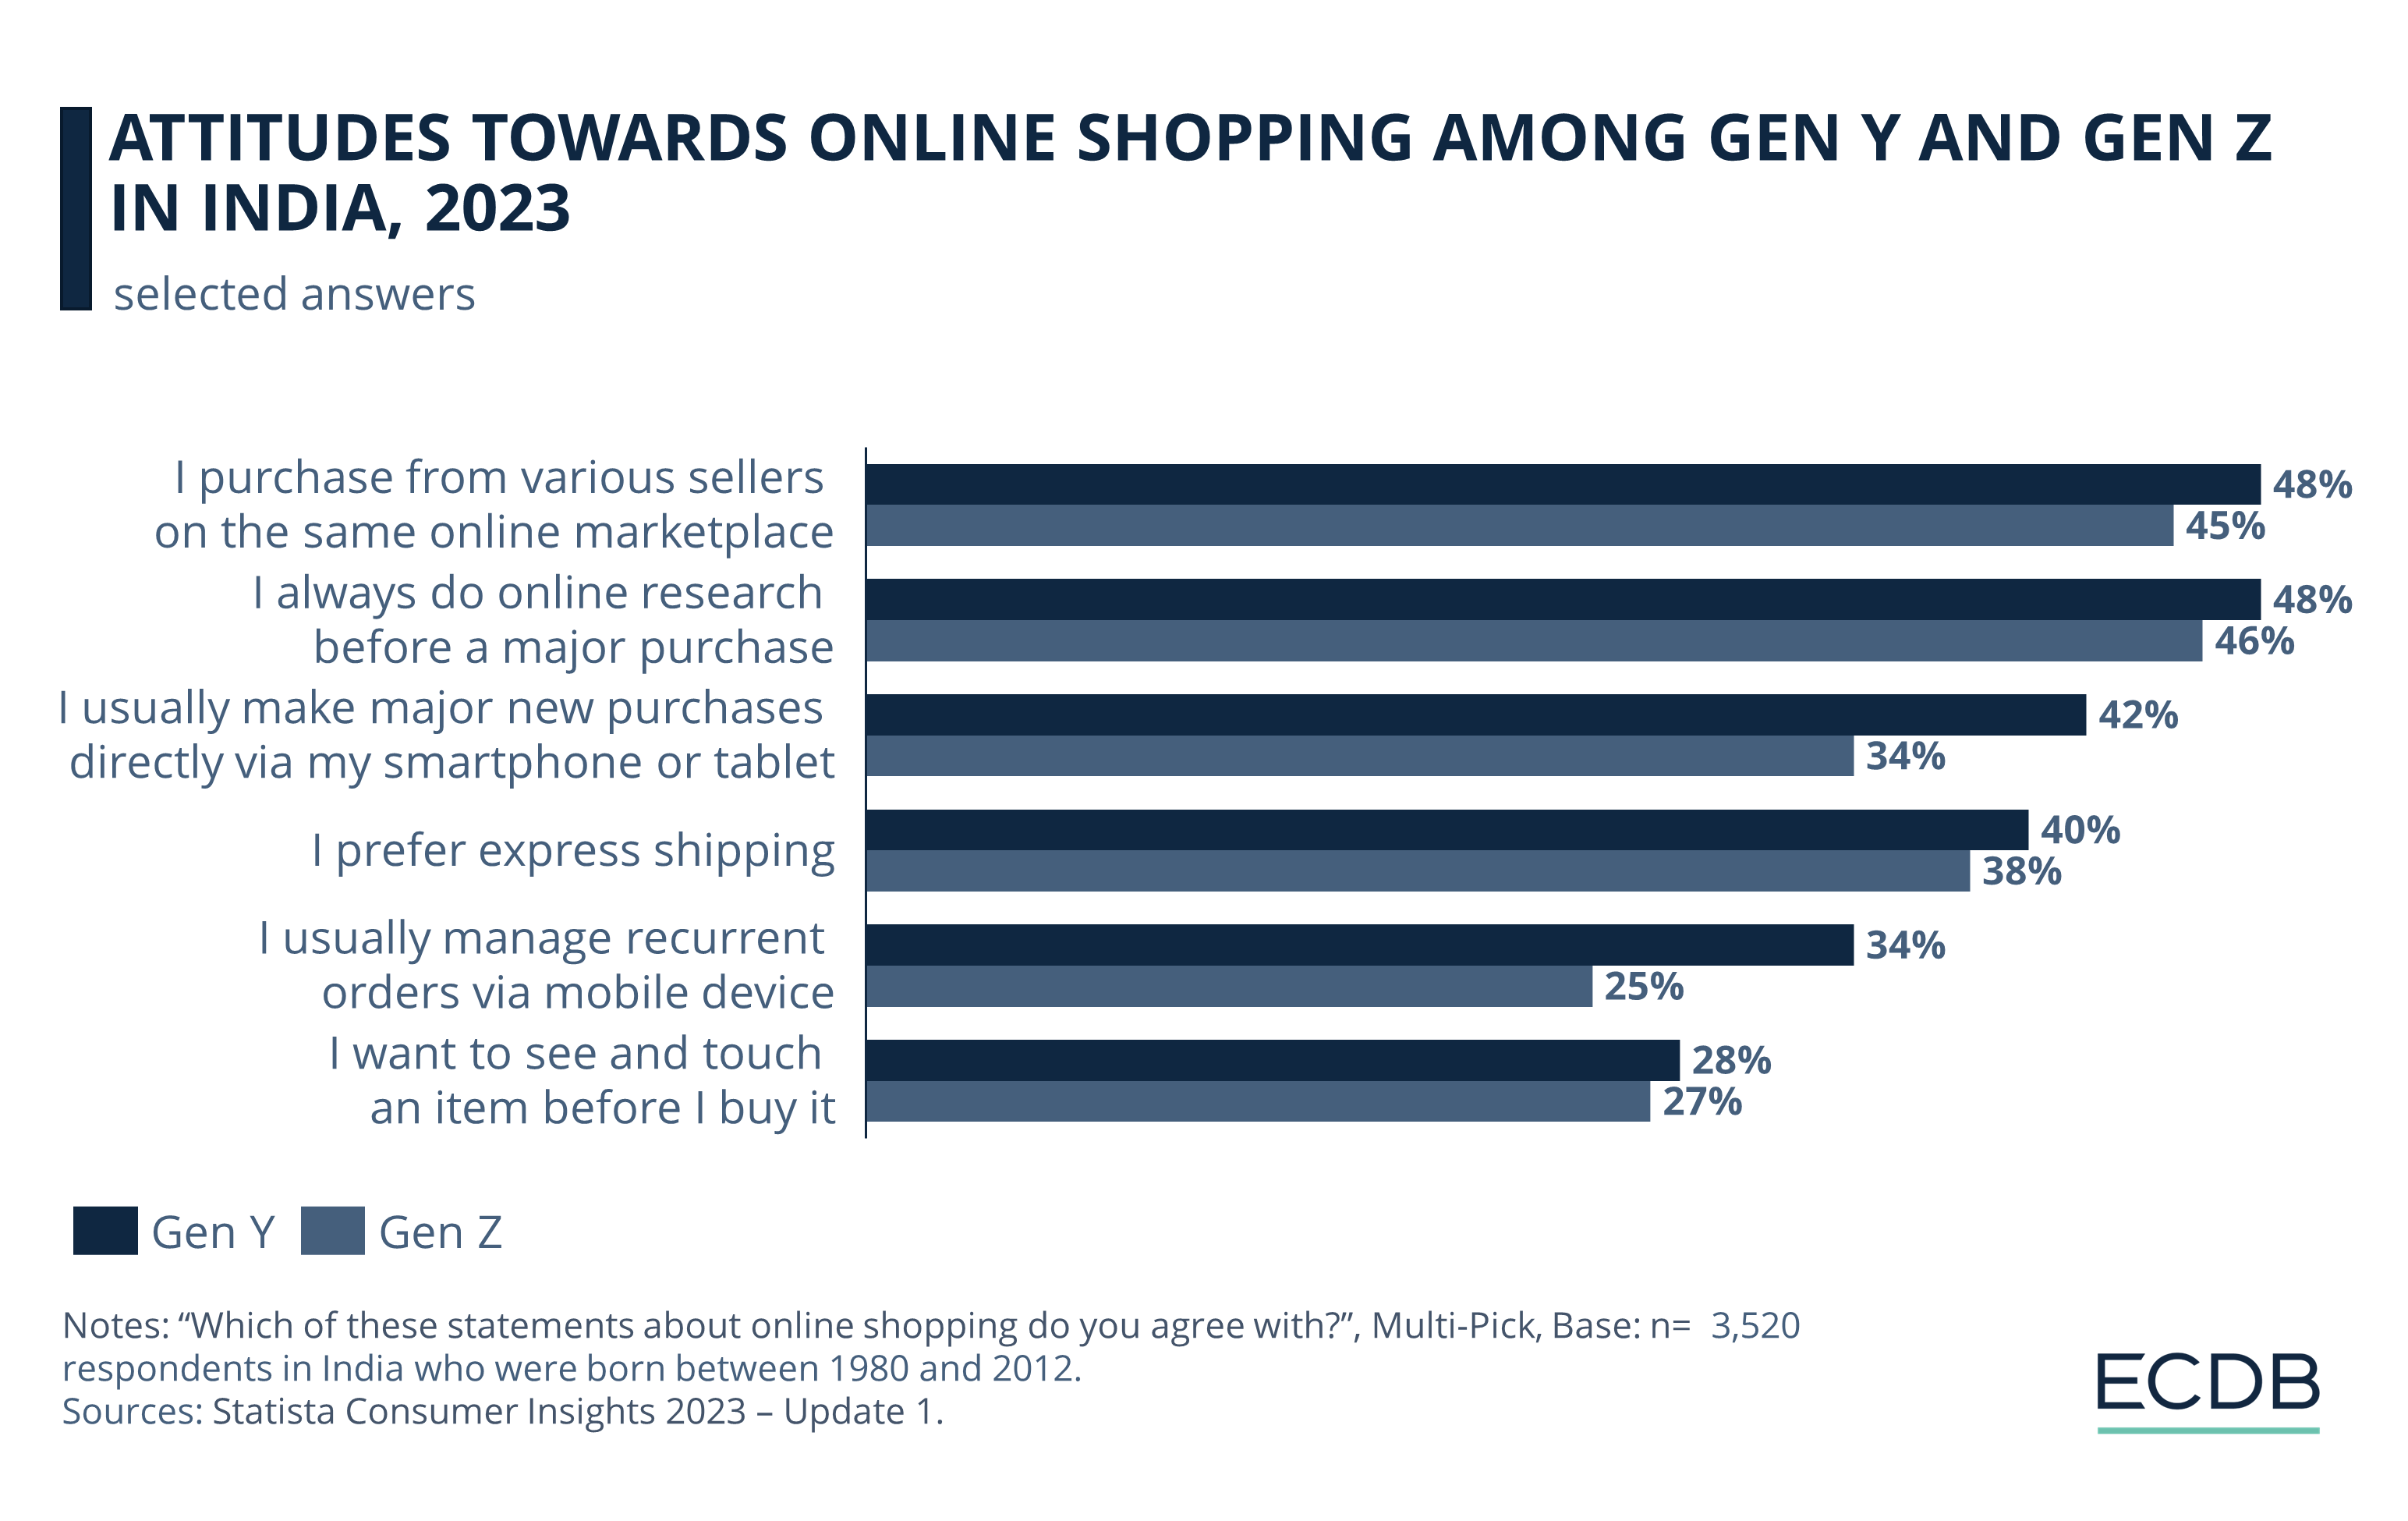 Attitudes Towards Online Shopping Among Gen Y and Gen Z in India, 2023